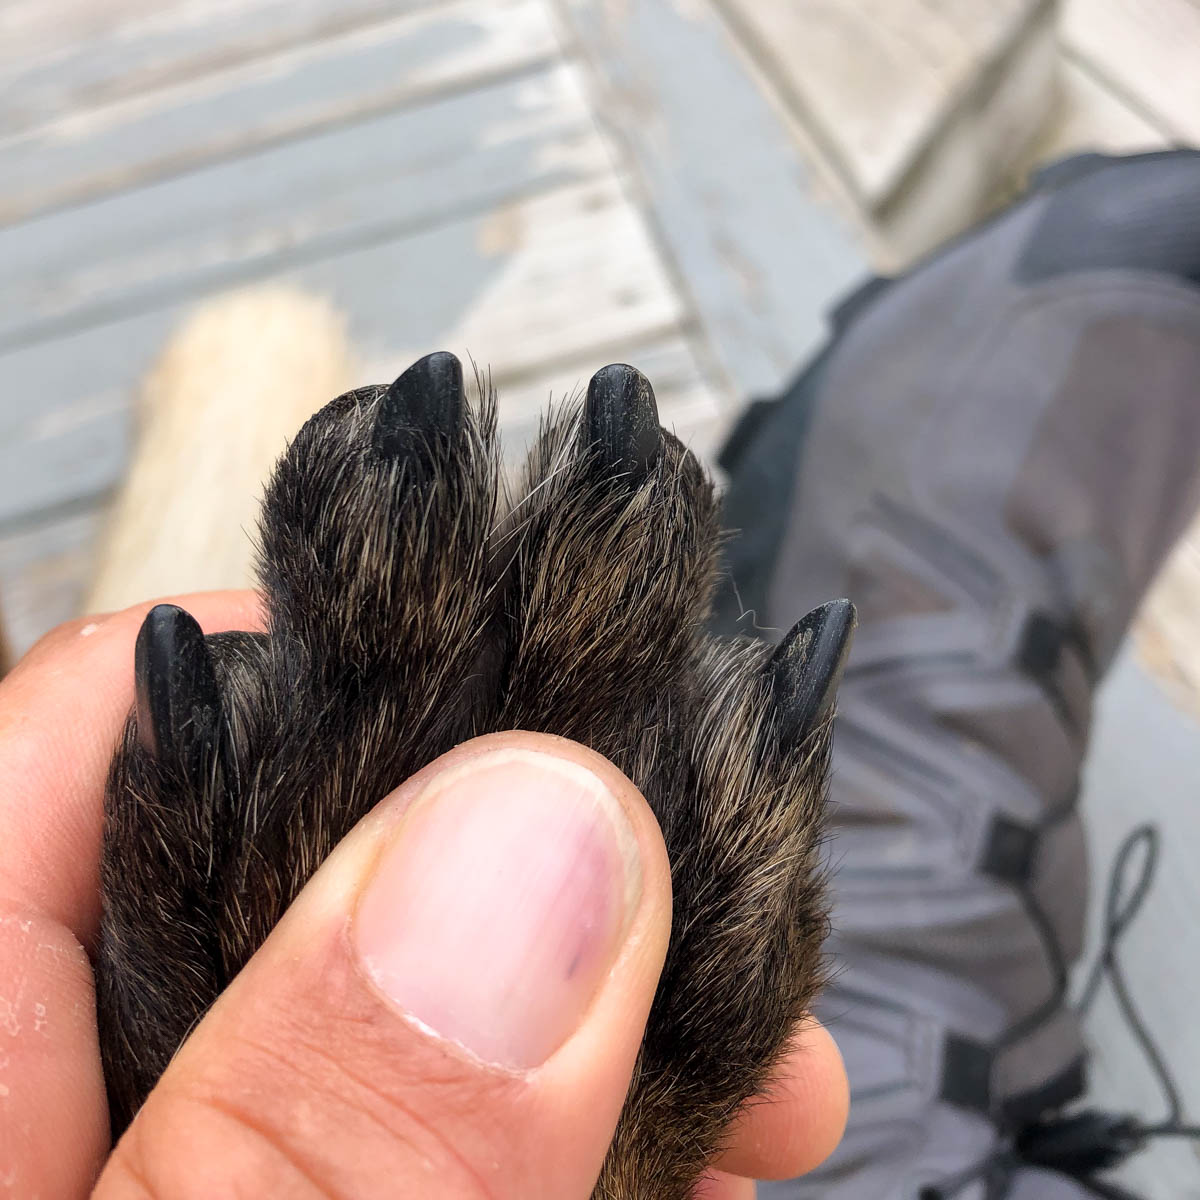 A person holding a dog's paw showing black dog nails.